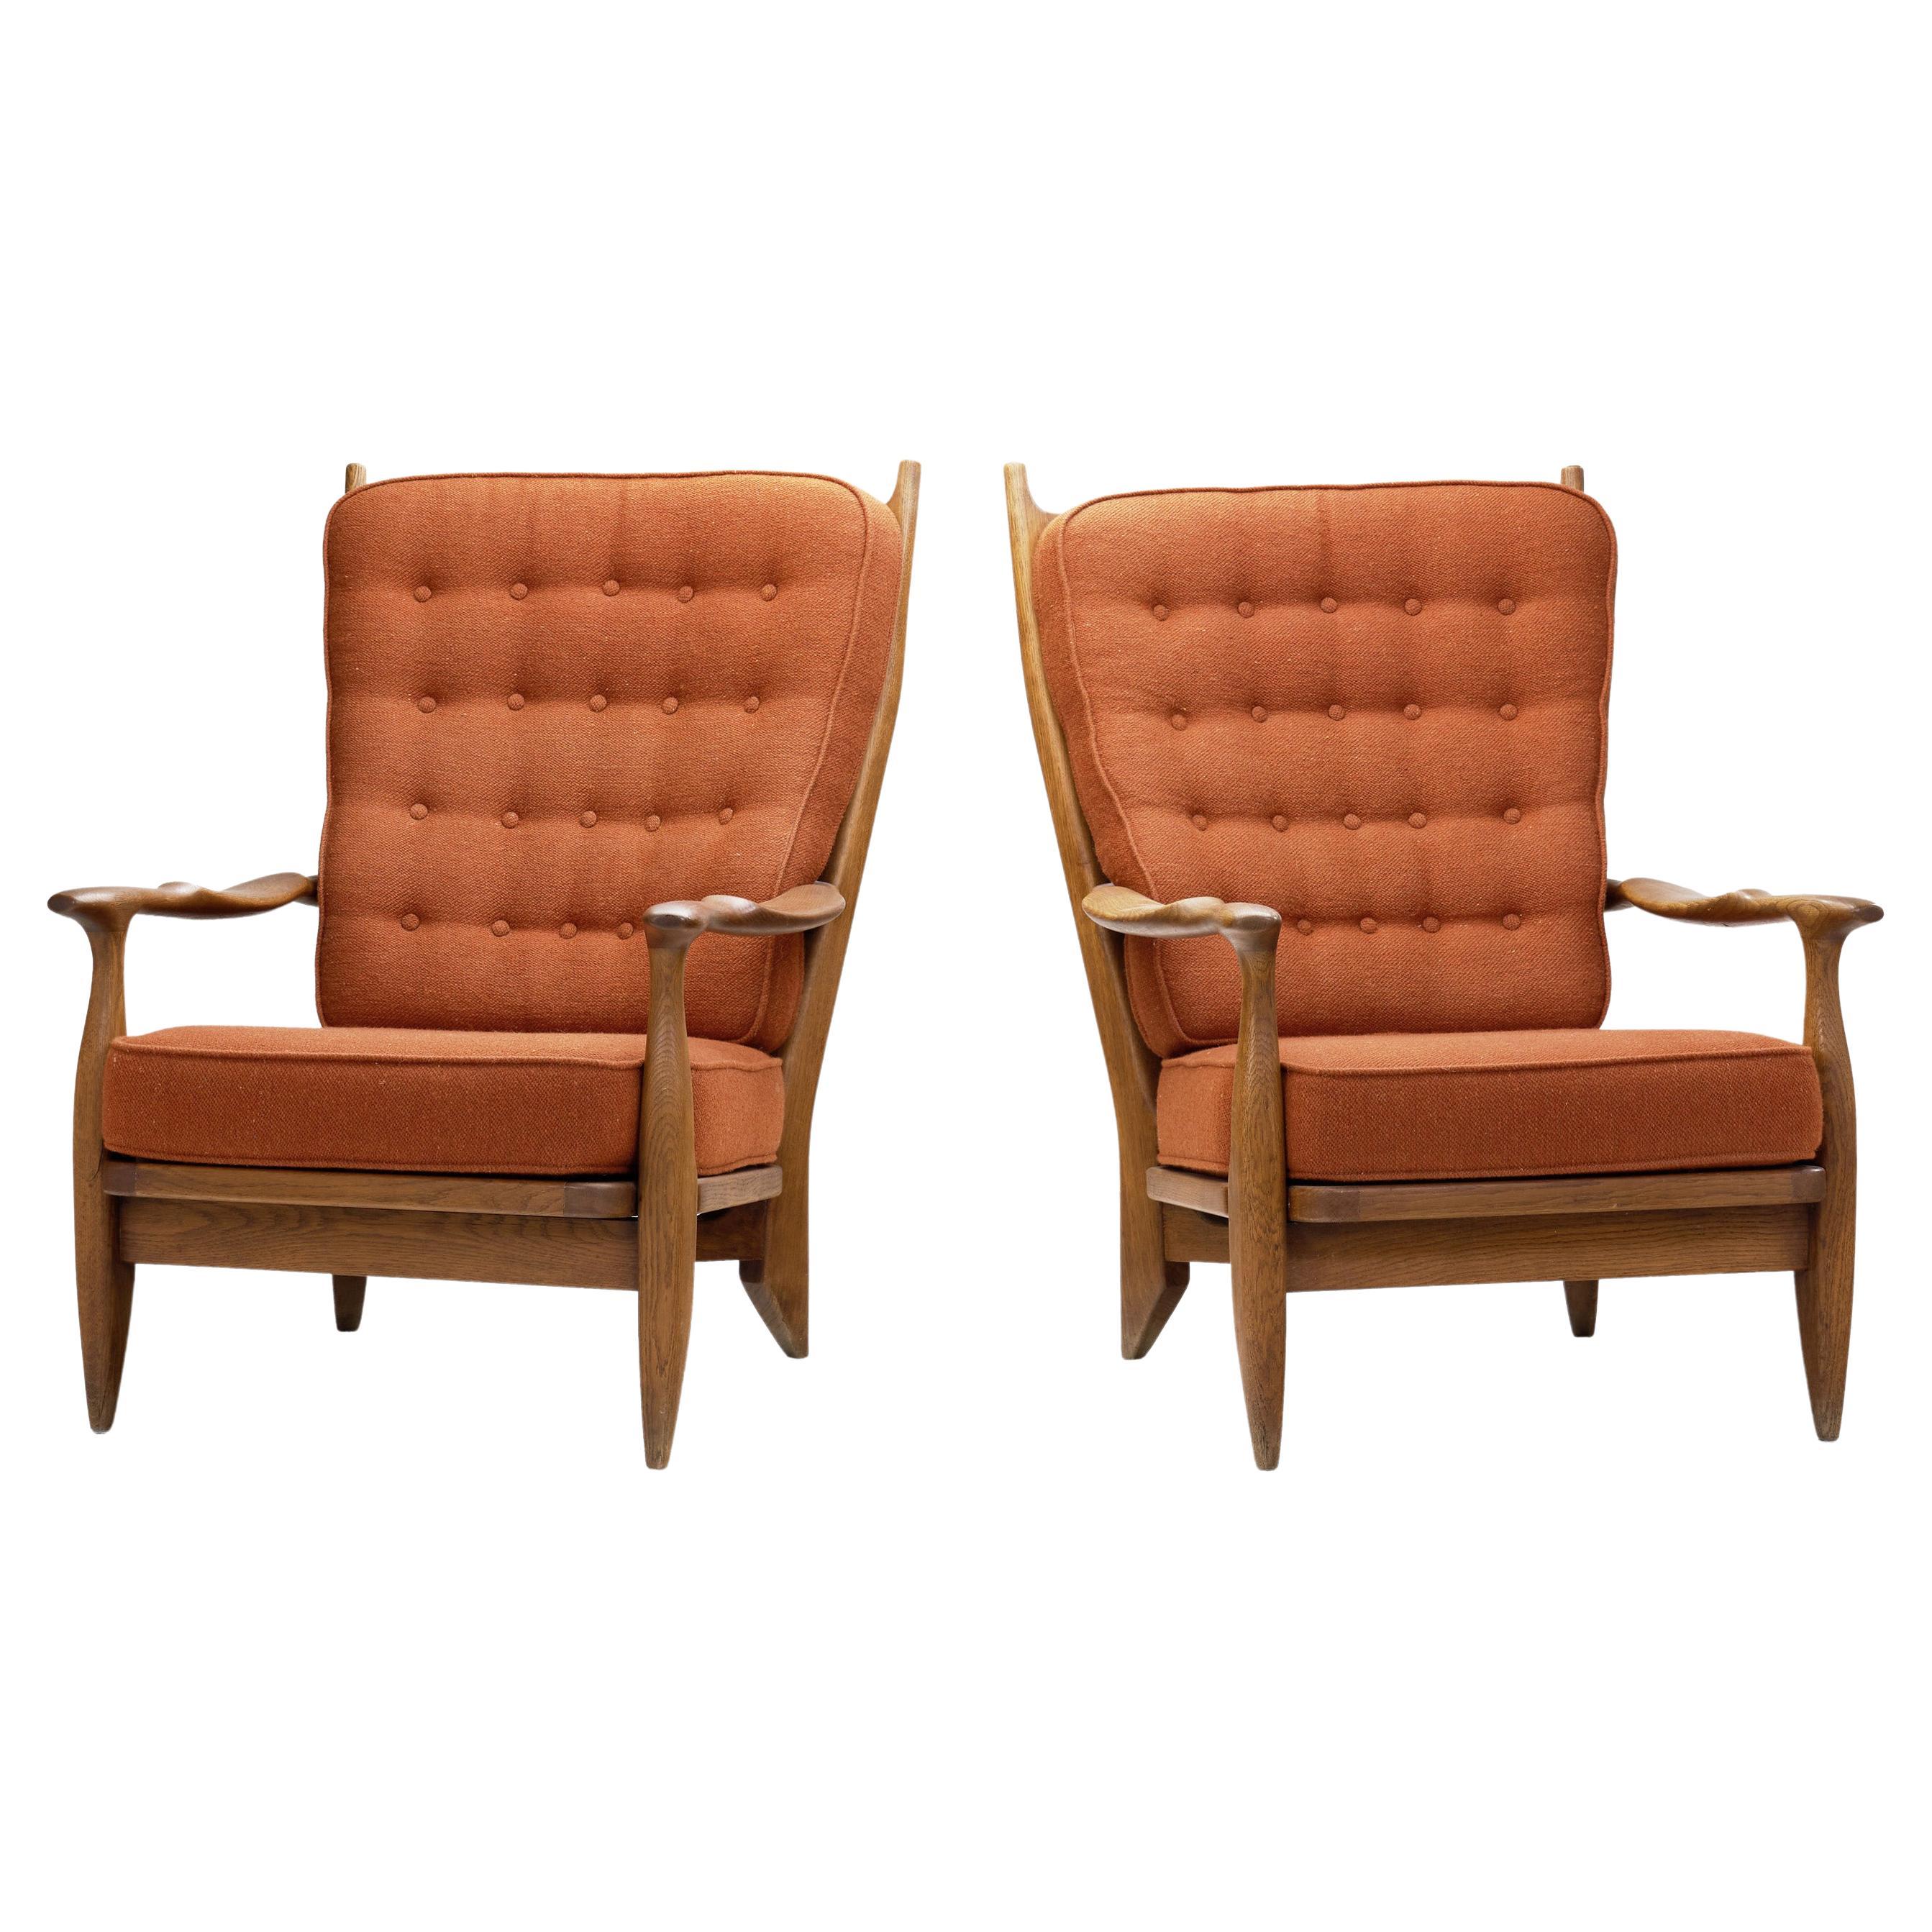 Armchairs with Terra Cotta Fabric by Guillerme and Chambron, France 1960s For Sale